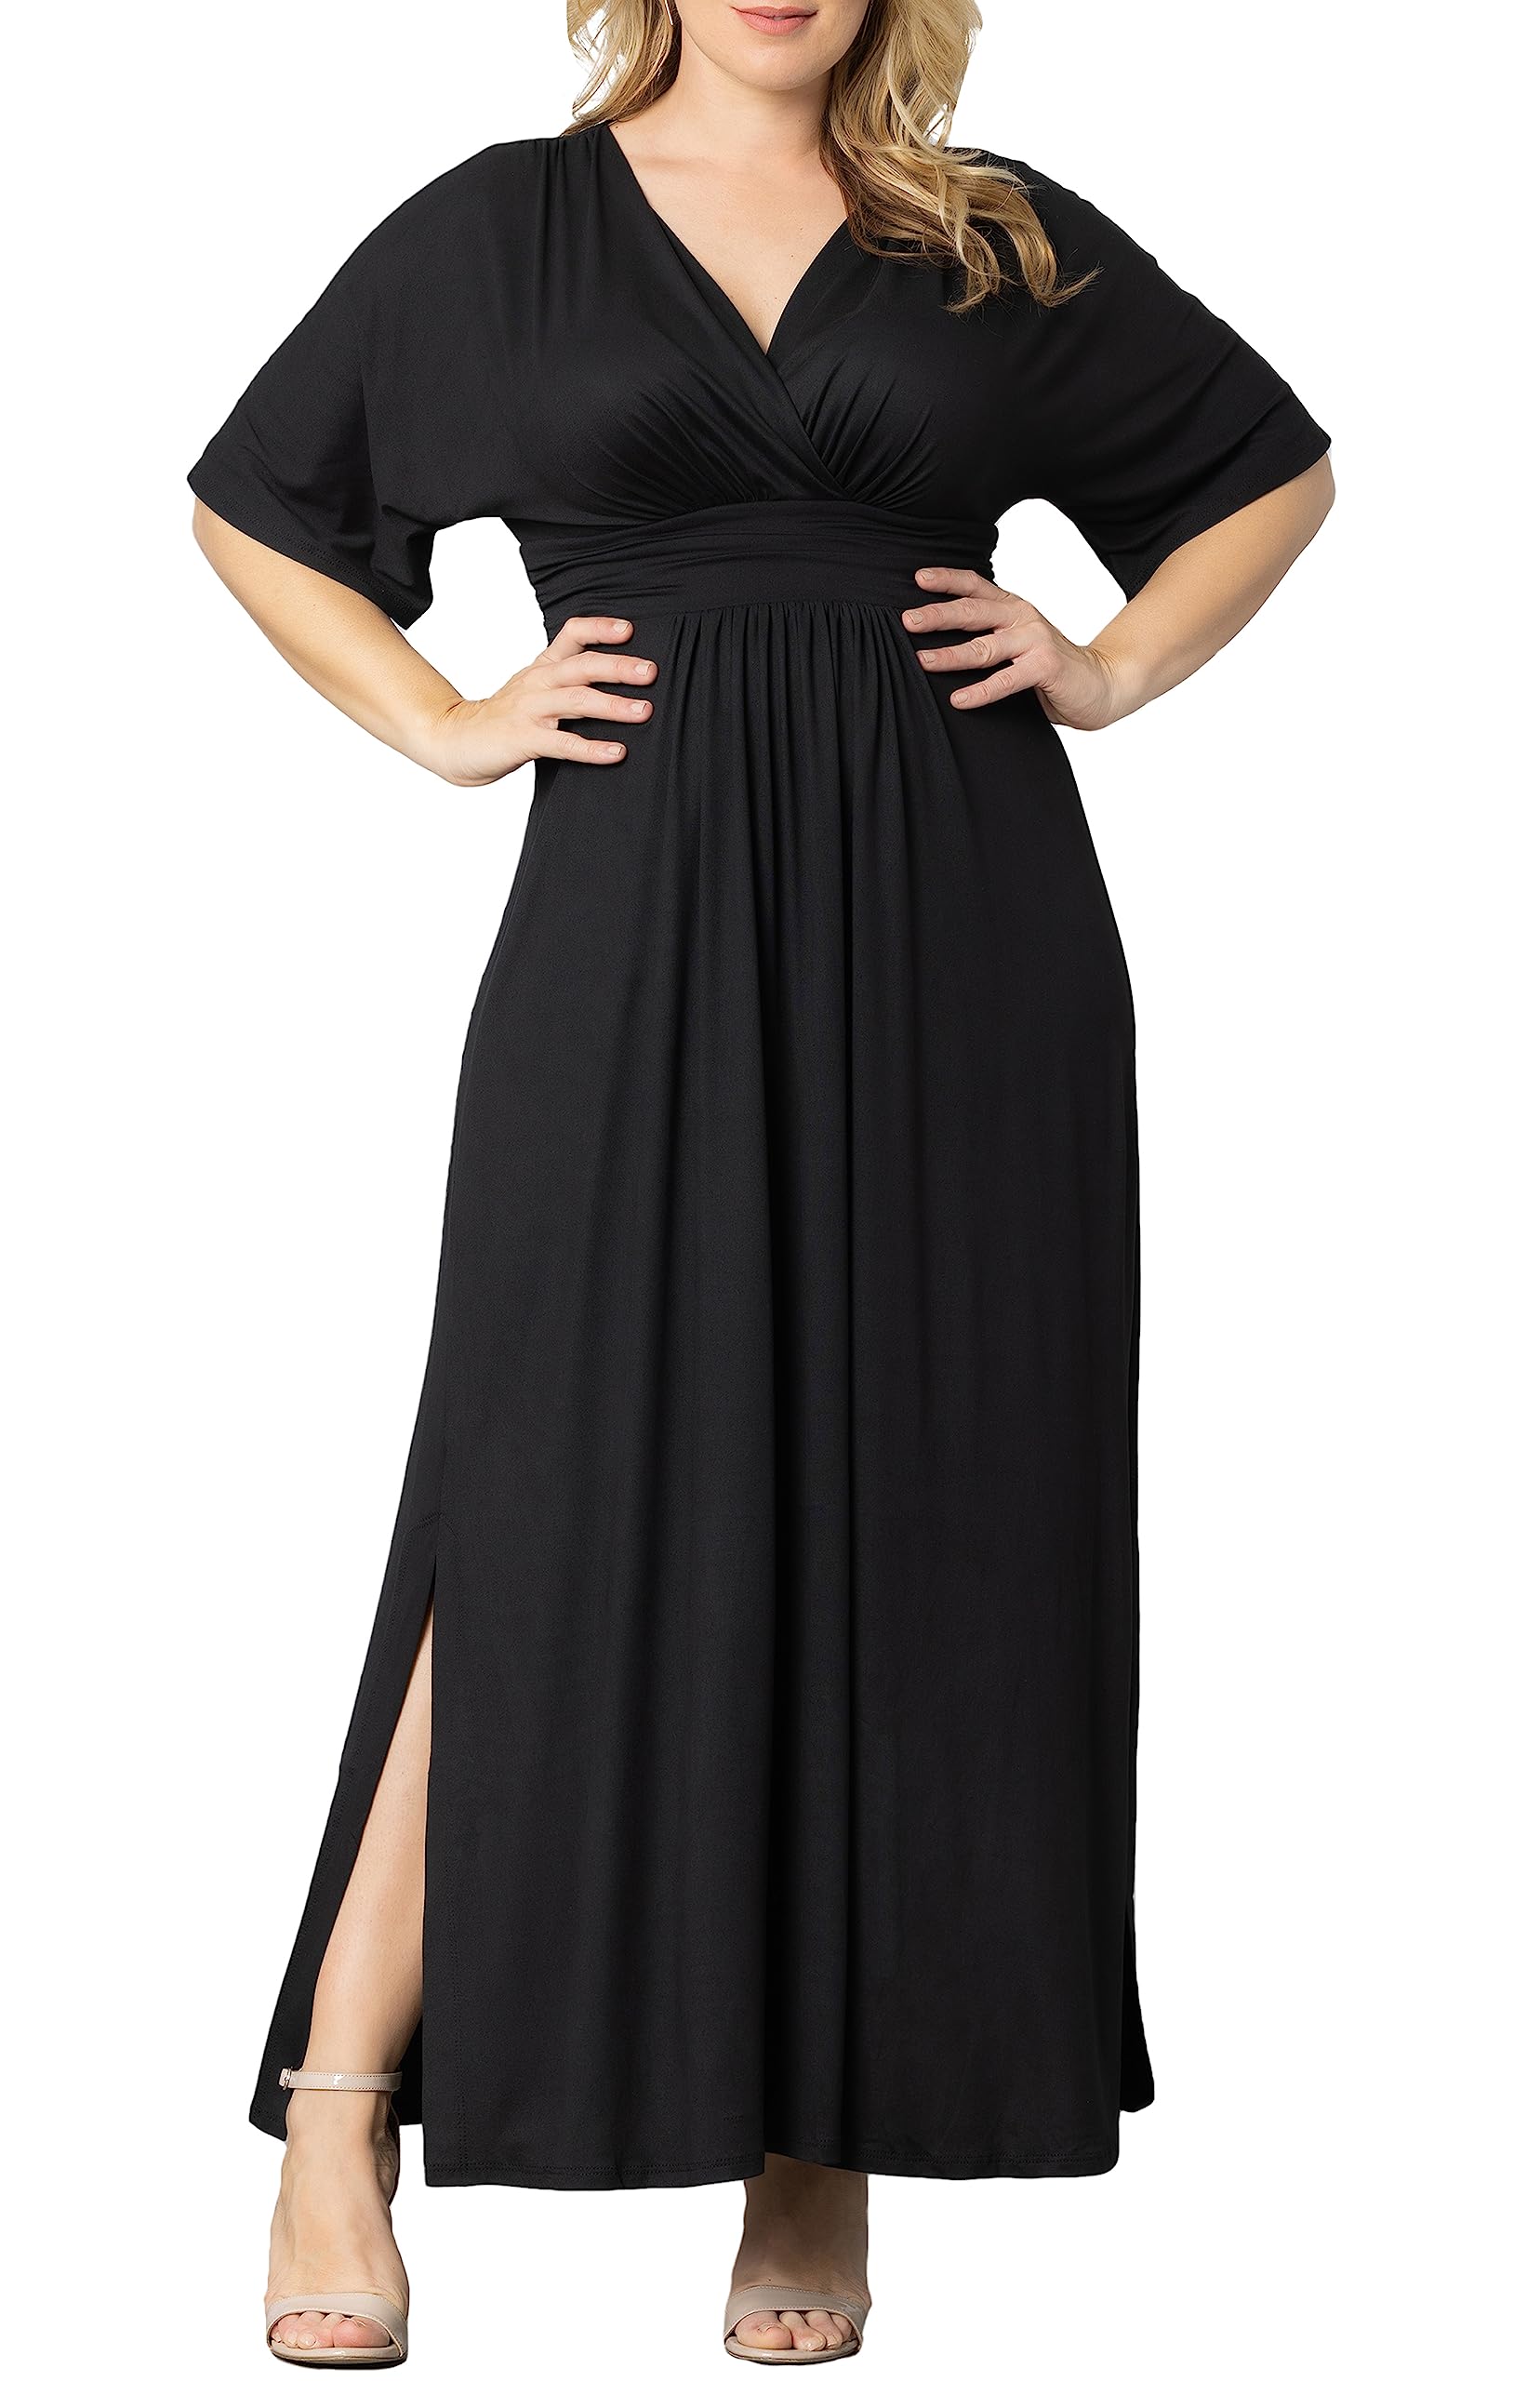 Kiyonna Women's Plus Size Vienna Maxi Dress | Long Dress with Sleeves for Special Occasions, Work, Weekend, or Vacation